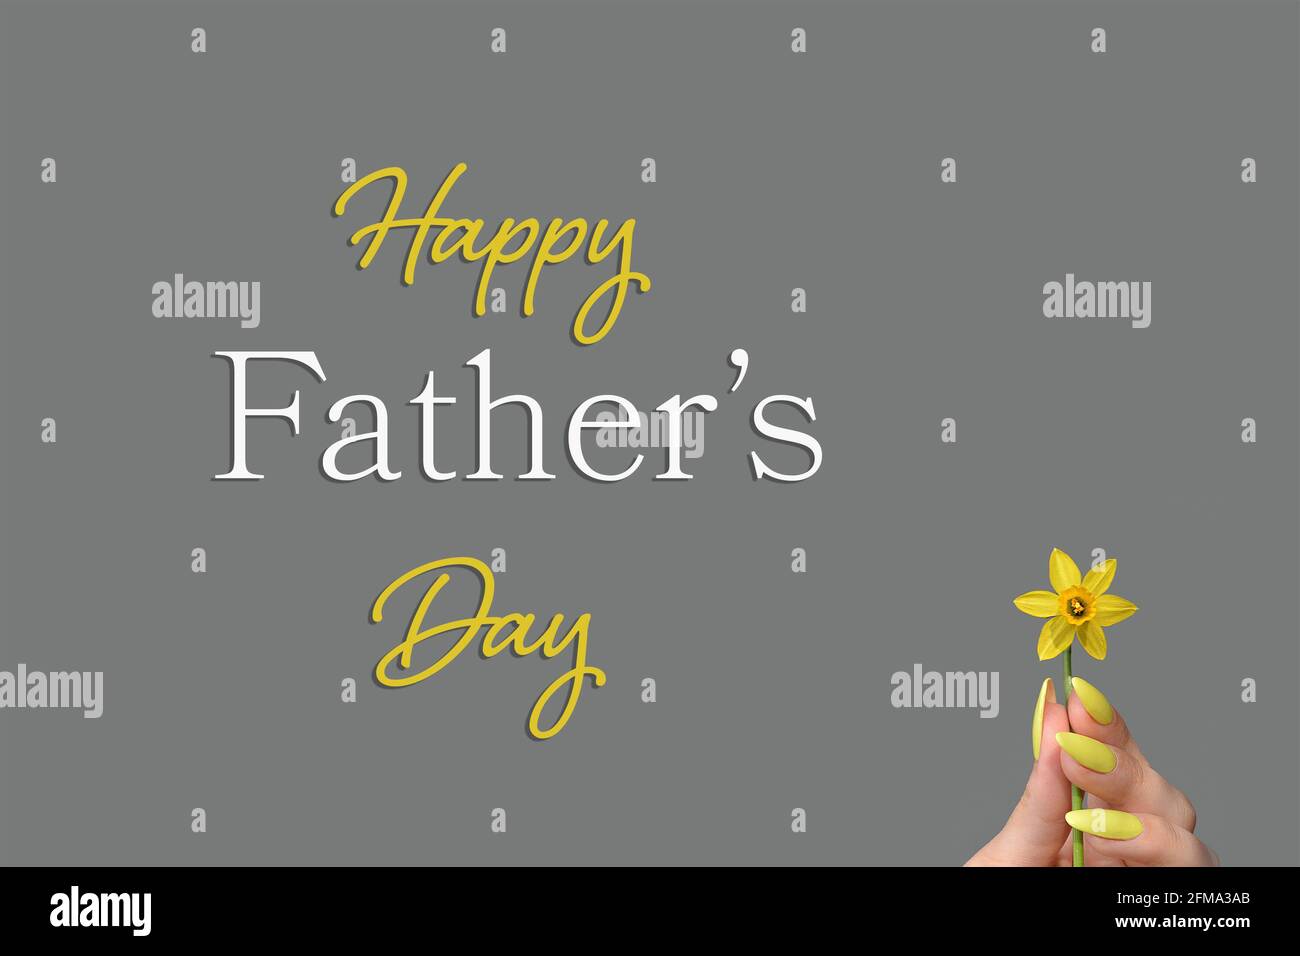 Fathers Day card with female hand holding daffodil flower Stock Photo